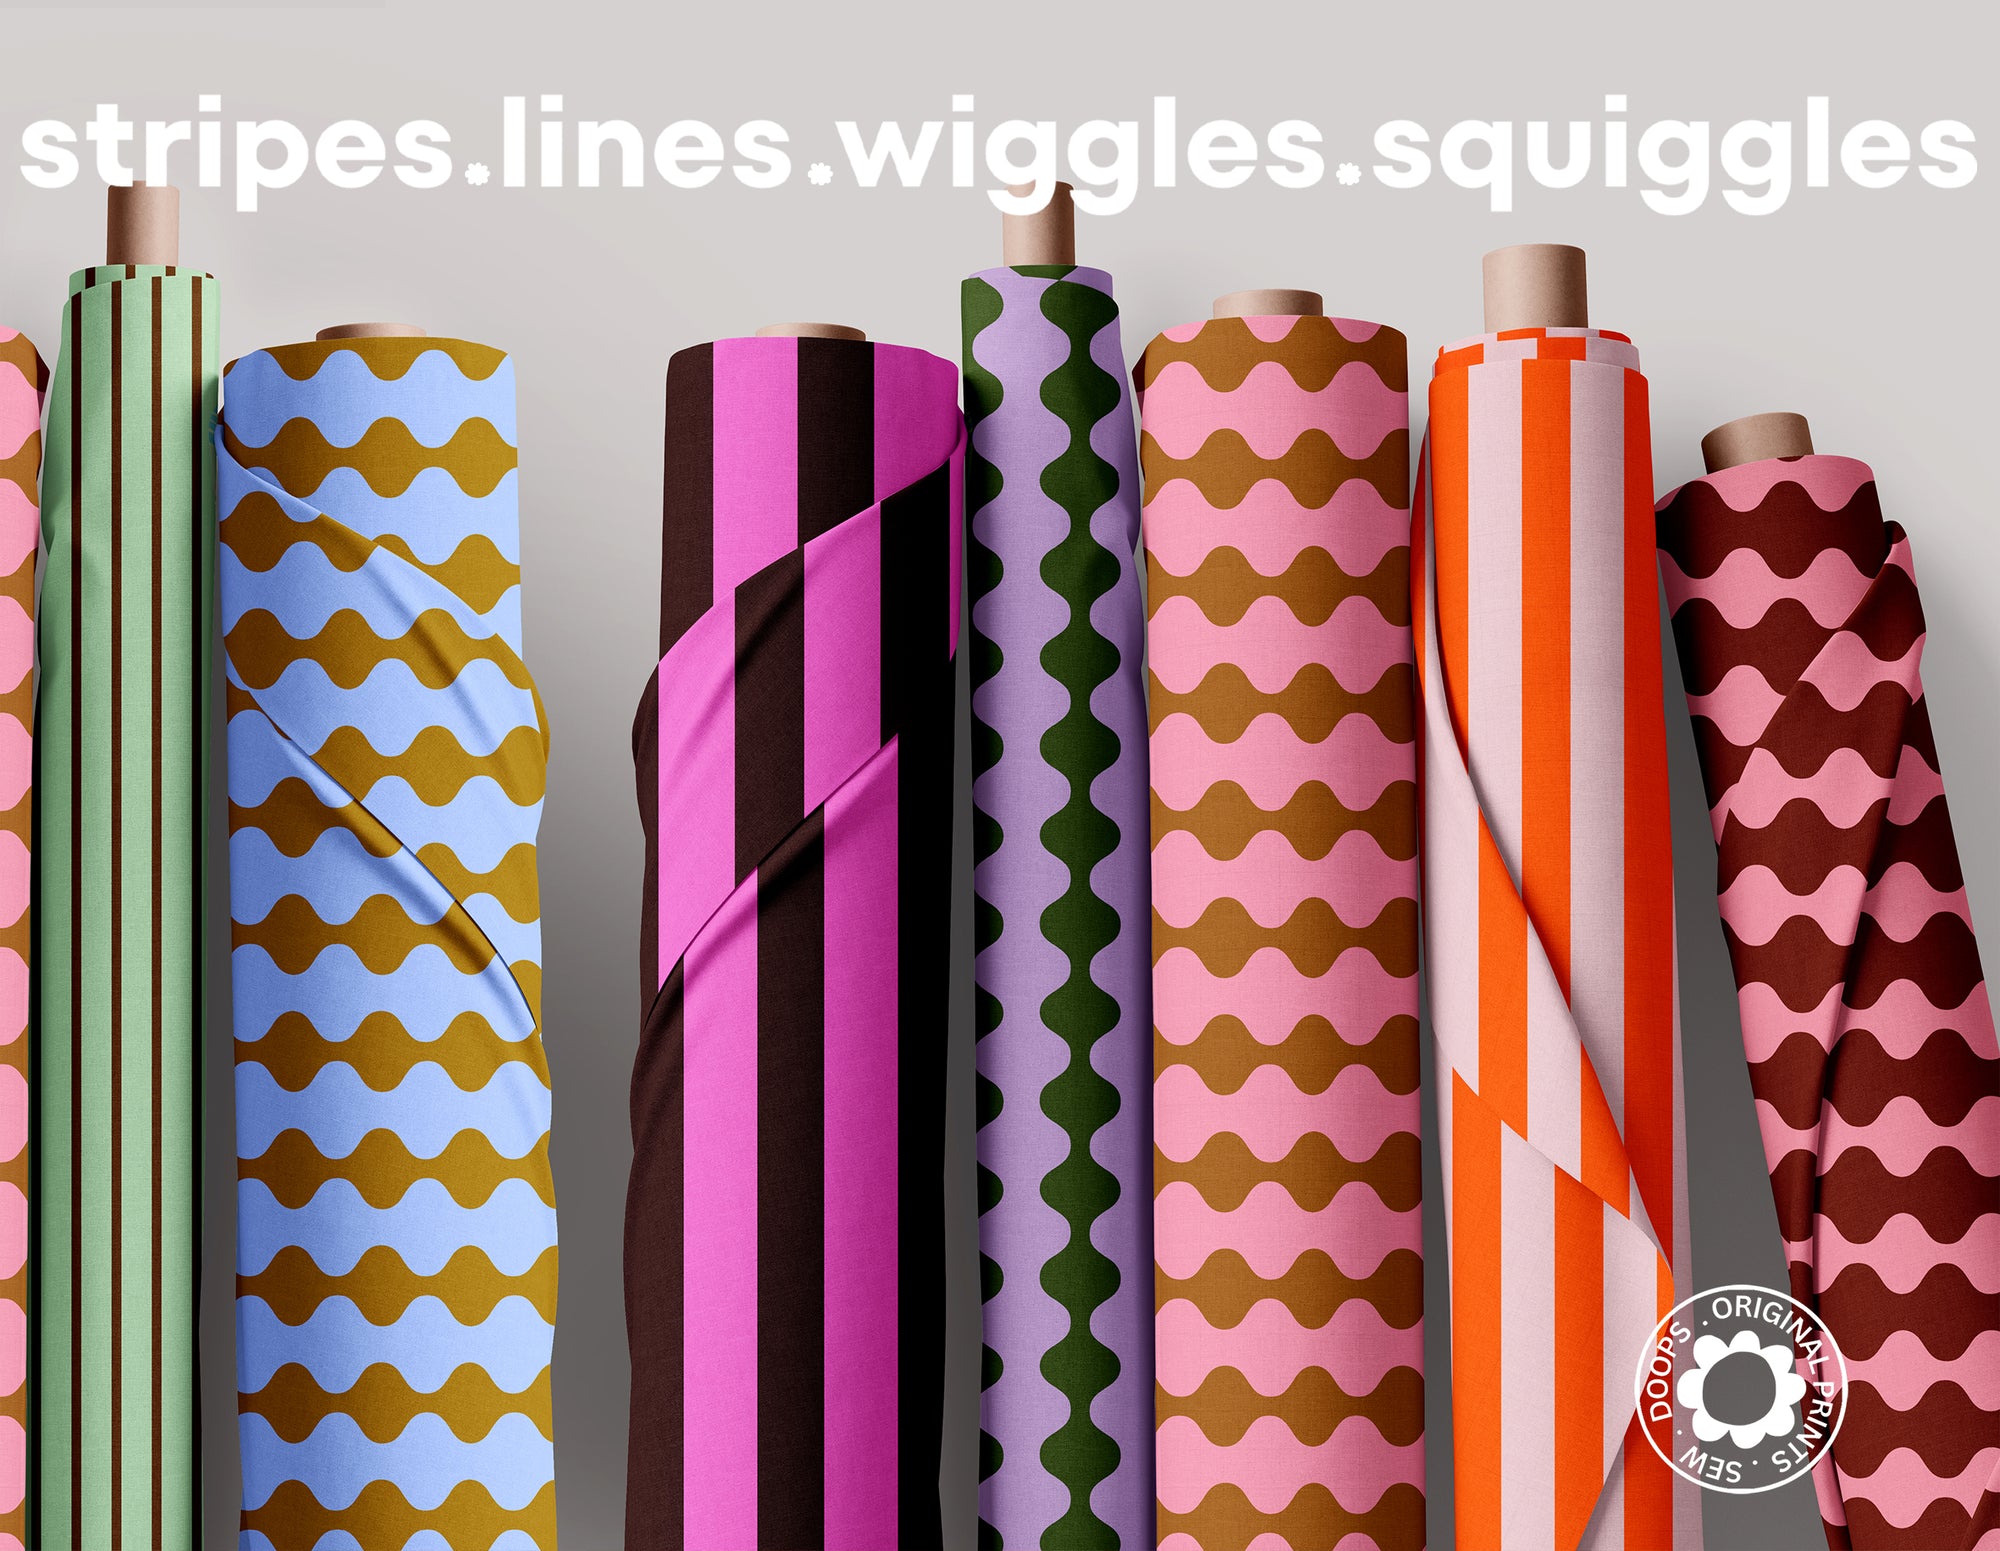 Stripes . Lines . Wiggles . Squiggles